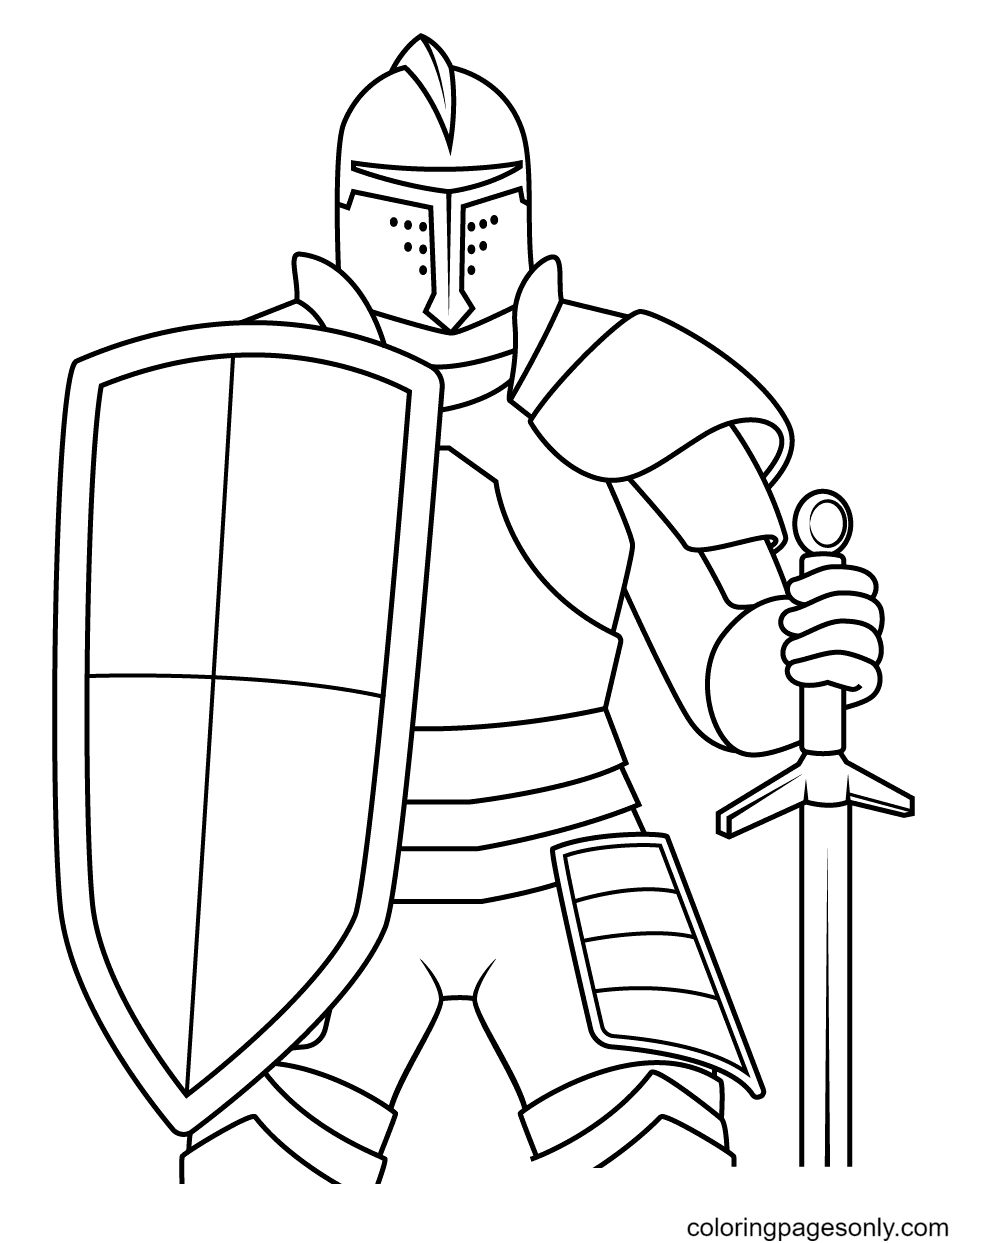 Knight with Sword and Shield Coloring Page